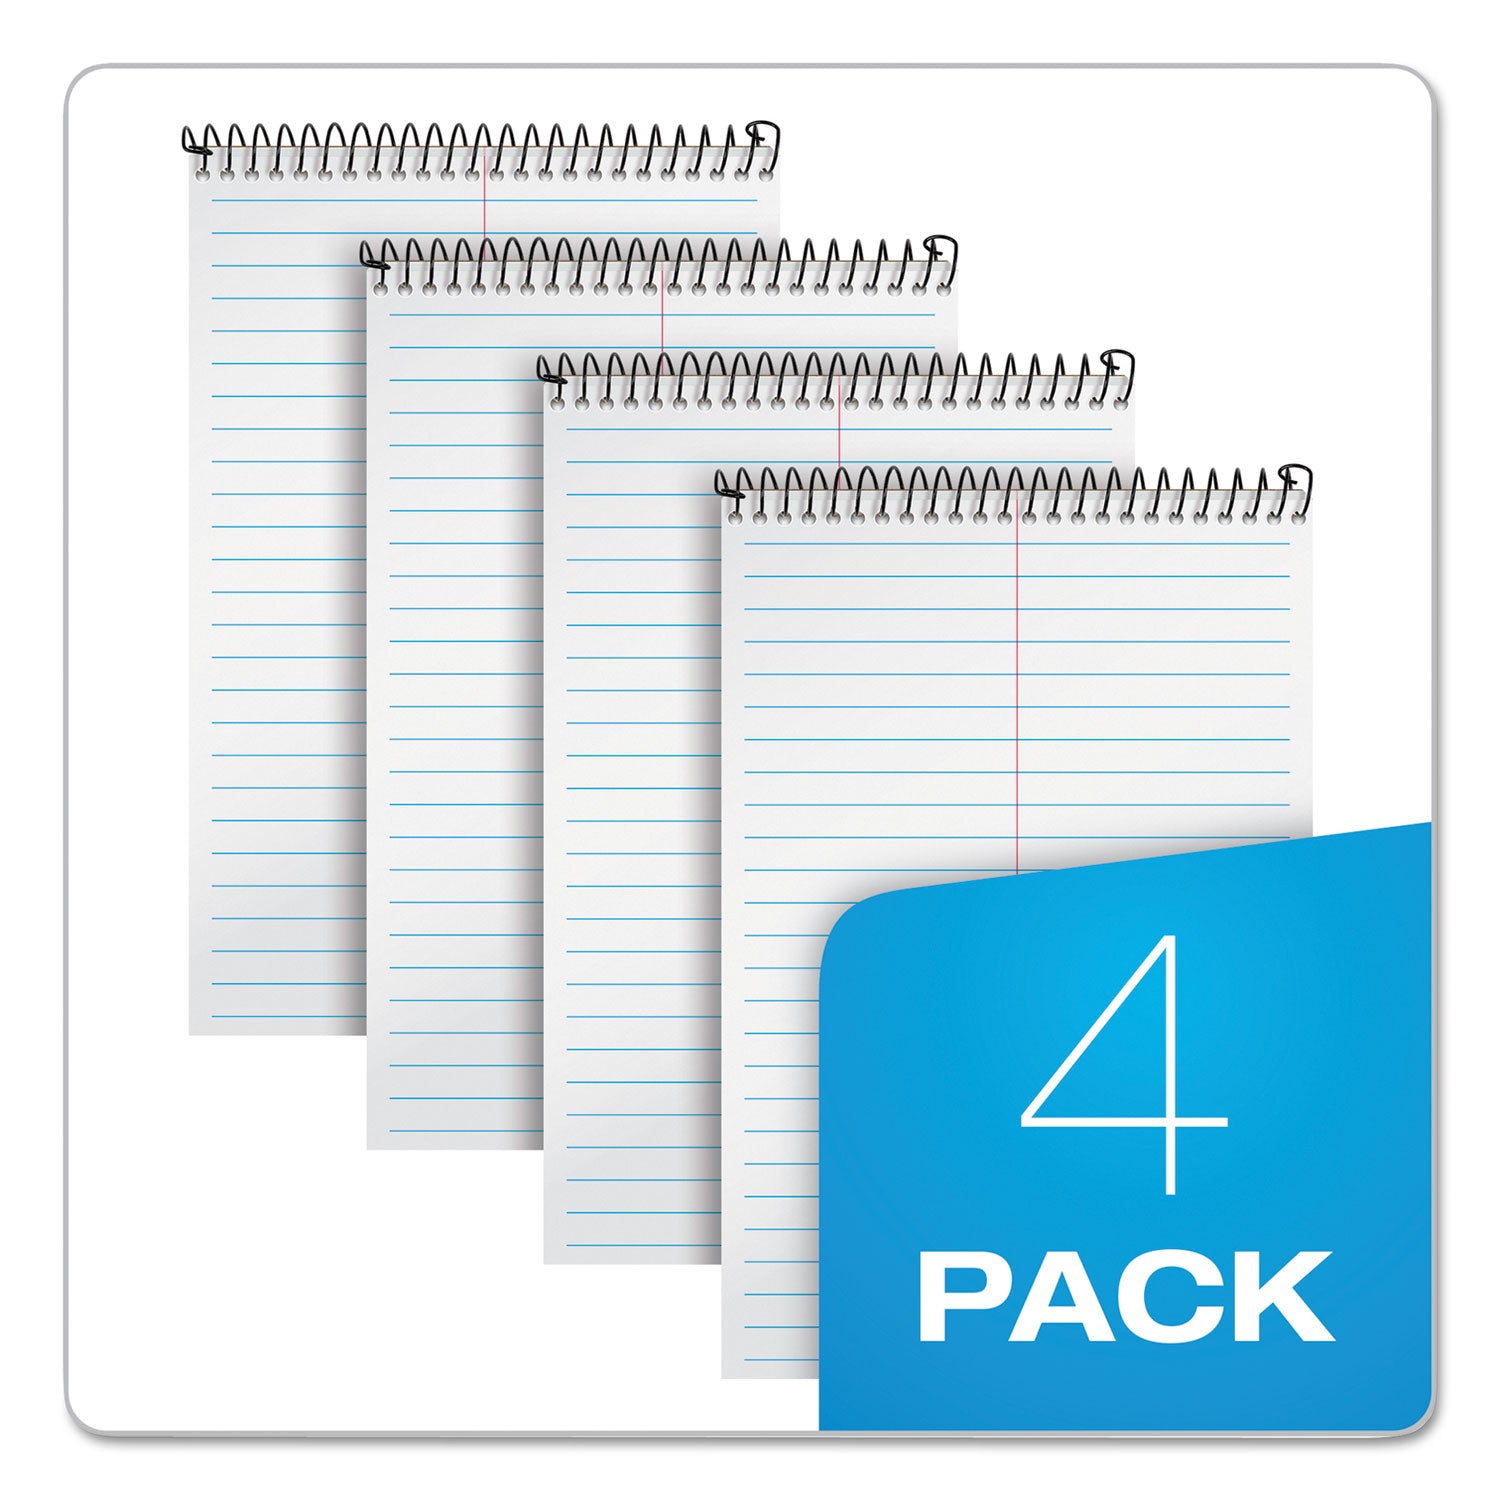 Second Nature Recycled Notepads, Gregg Rule, Brown Cover, 70 White 6 x 9 Sheets - 